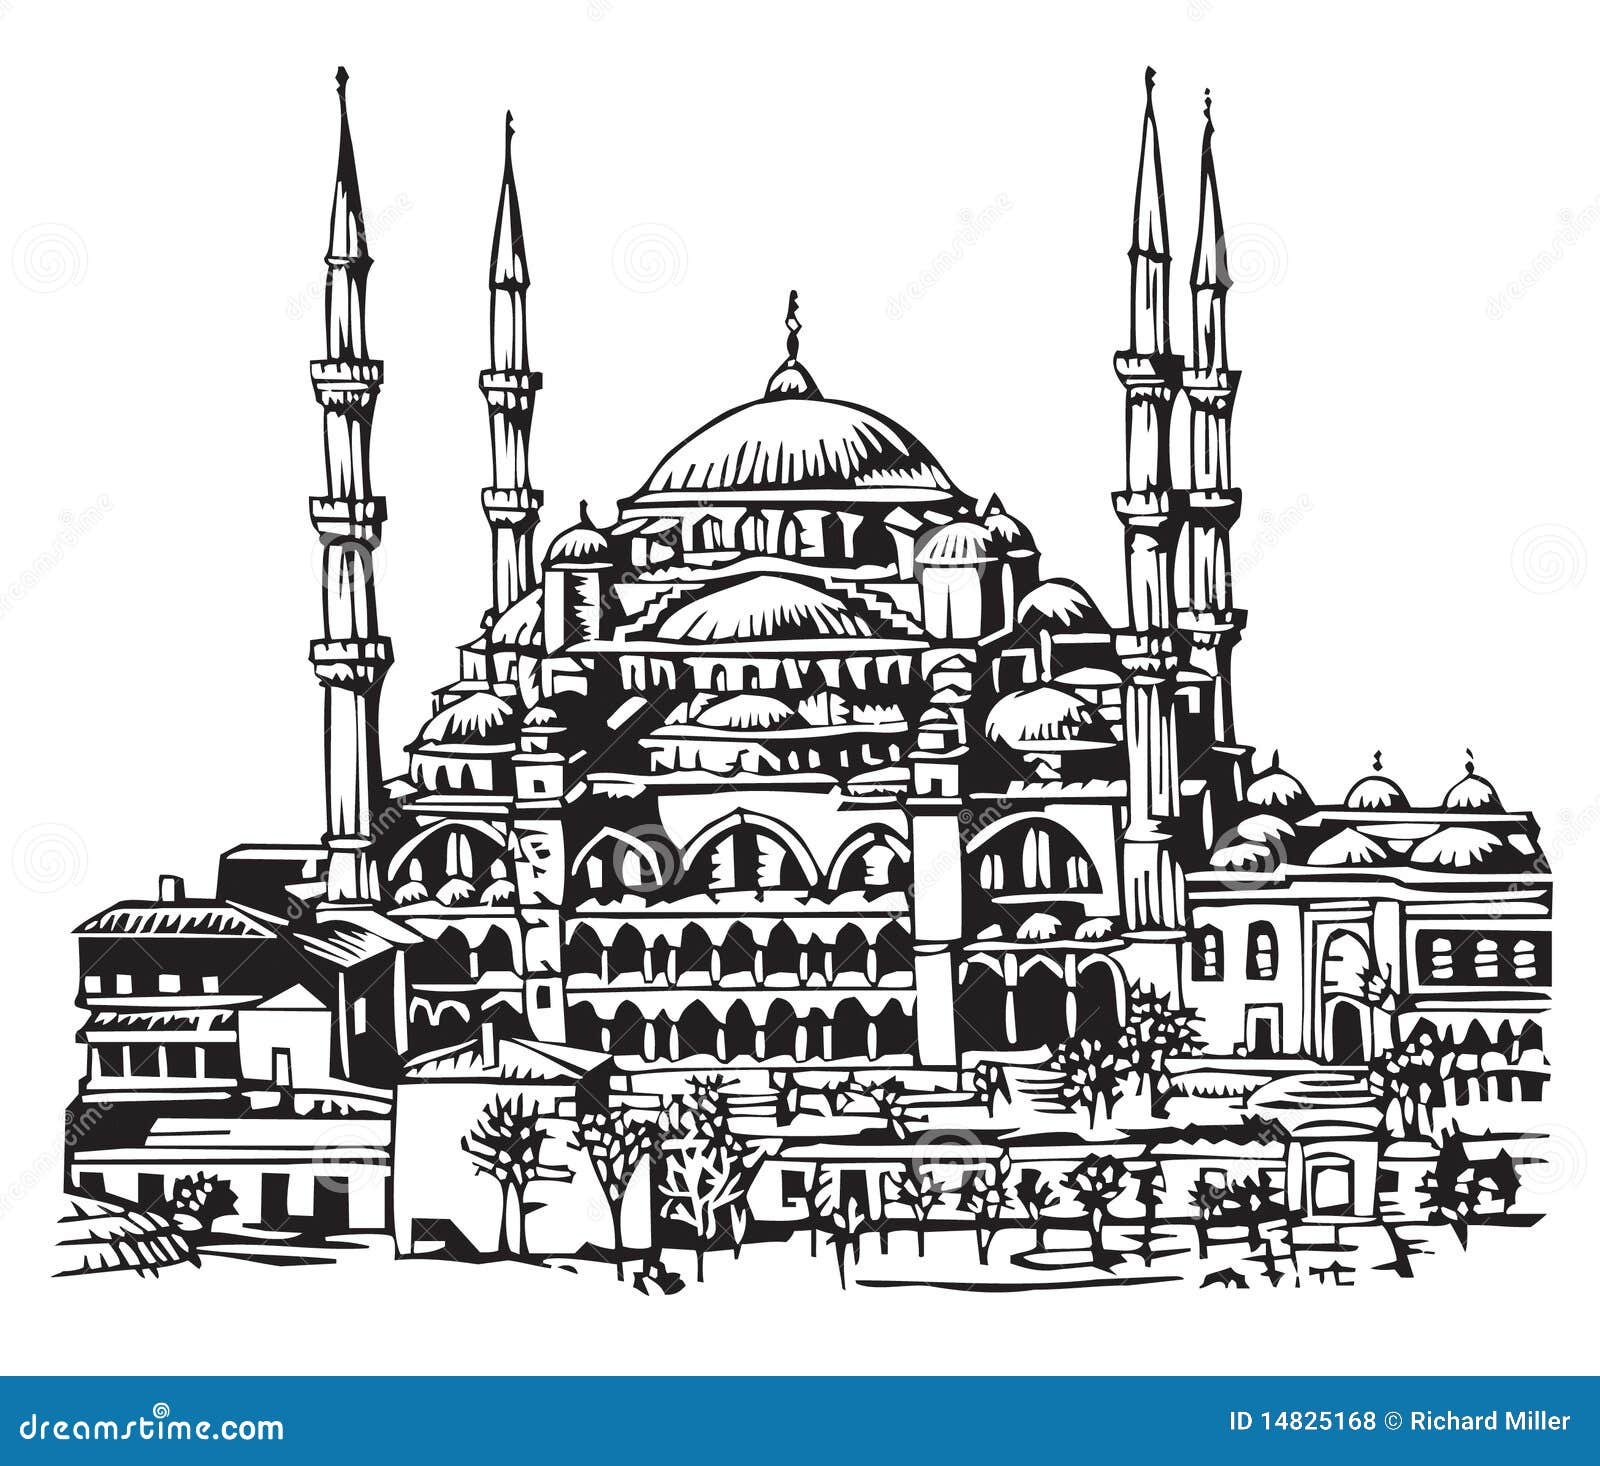 clipart istanbul - photo #7